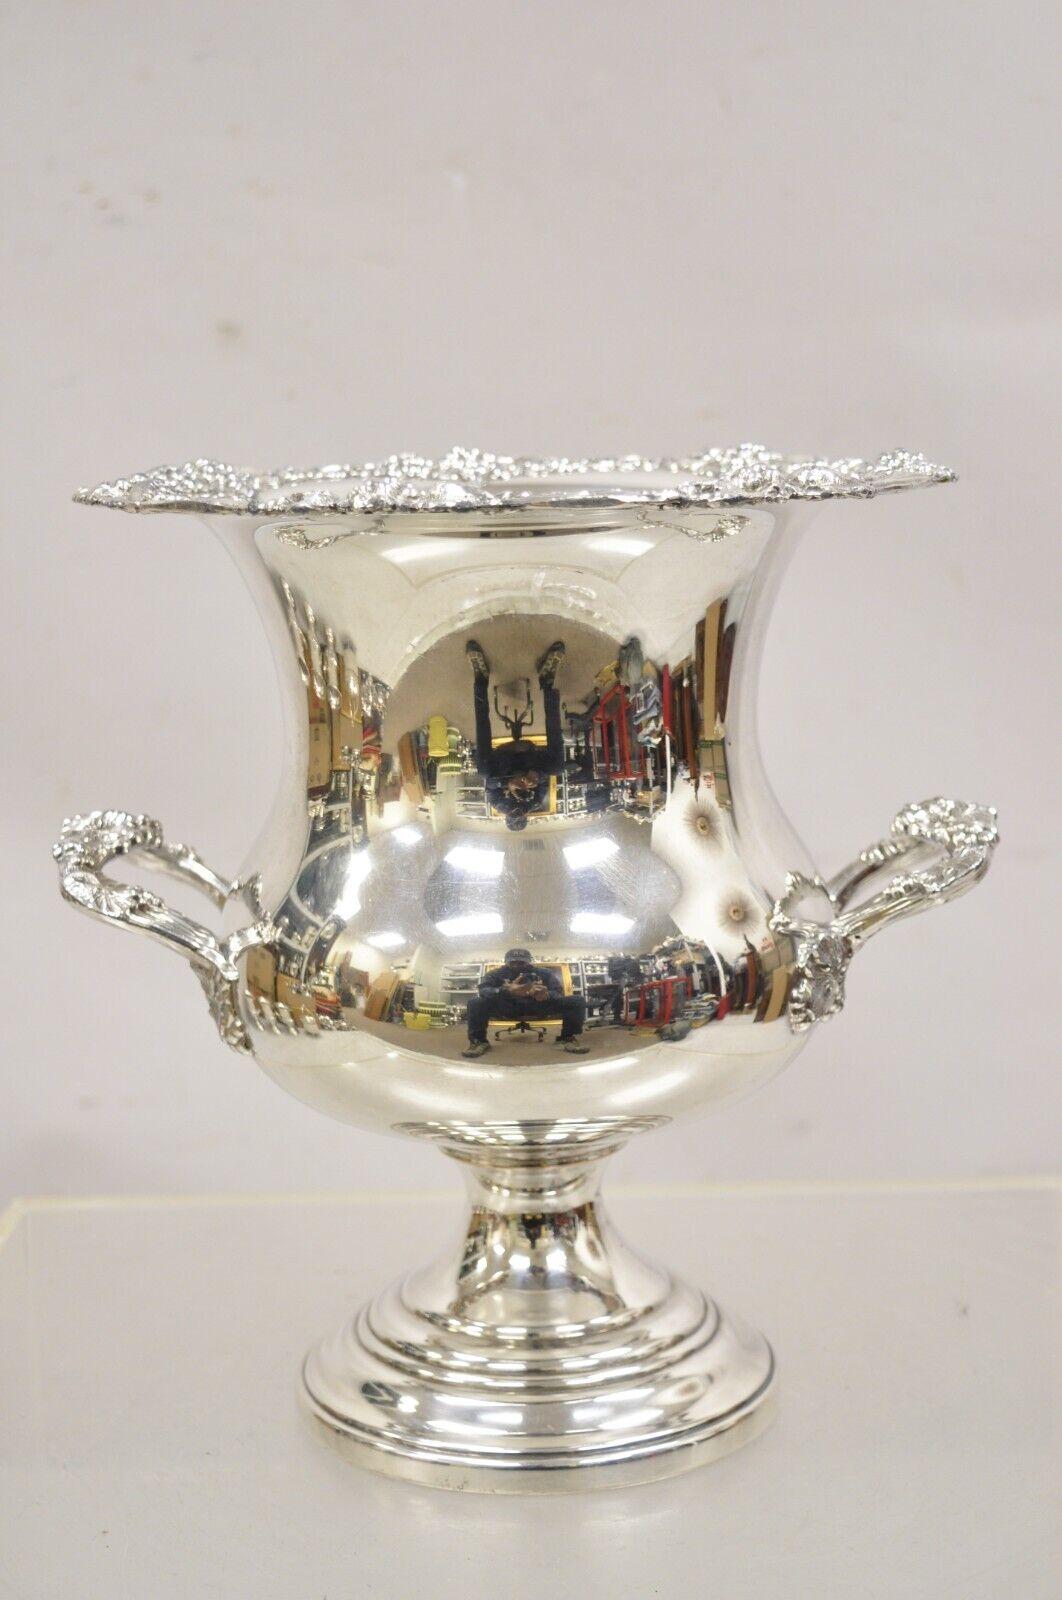 Vintage Grapevine Pattern Silver Plated Trophy Cup Champagne Chiller Ice Bucket. Circa Mid to Late 20th Century. Measurements: 11